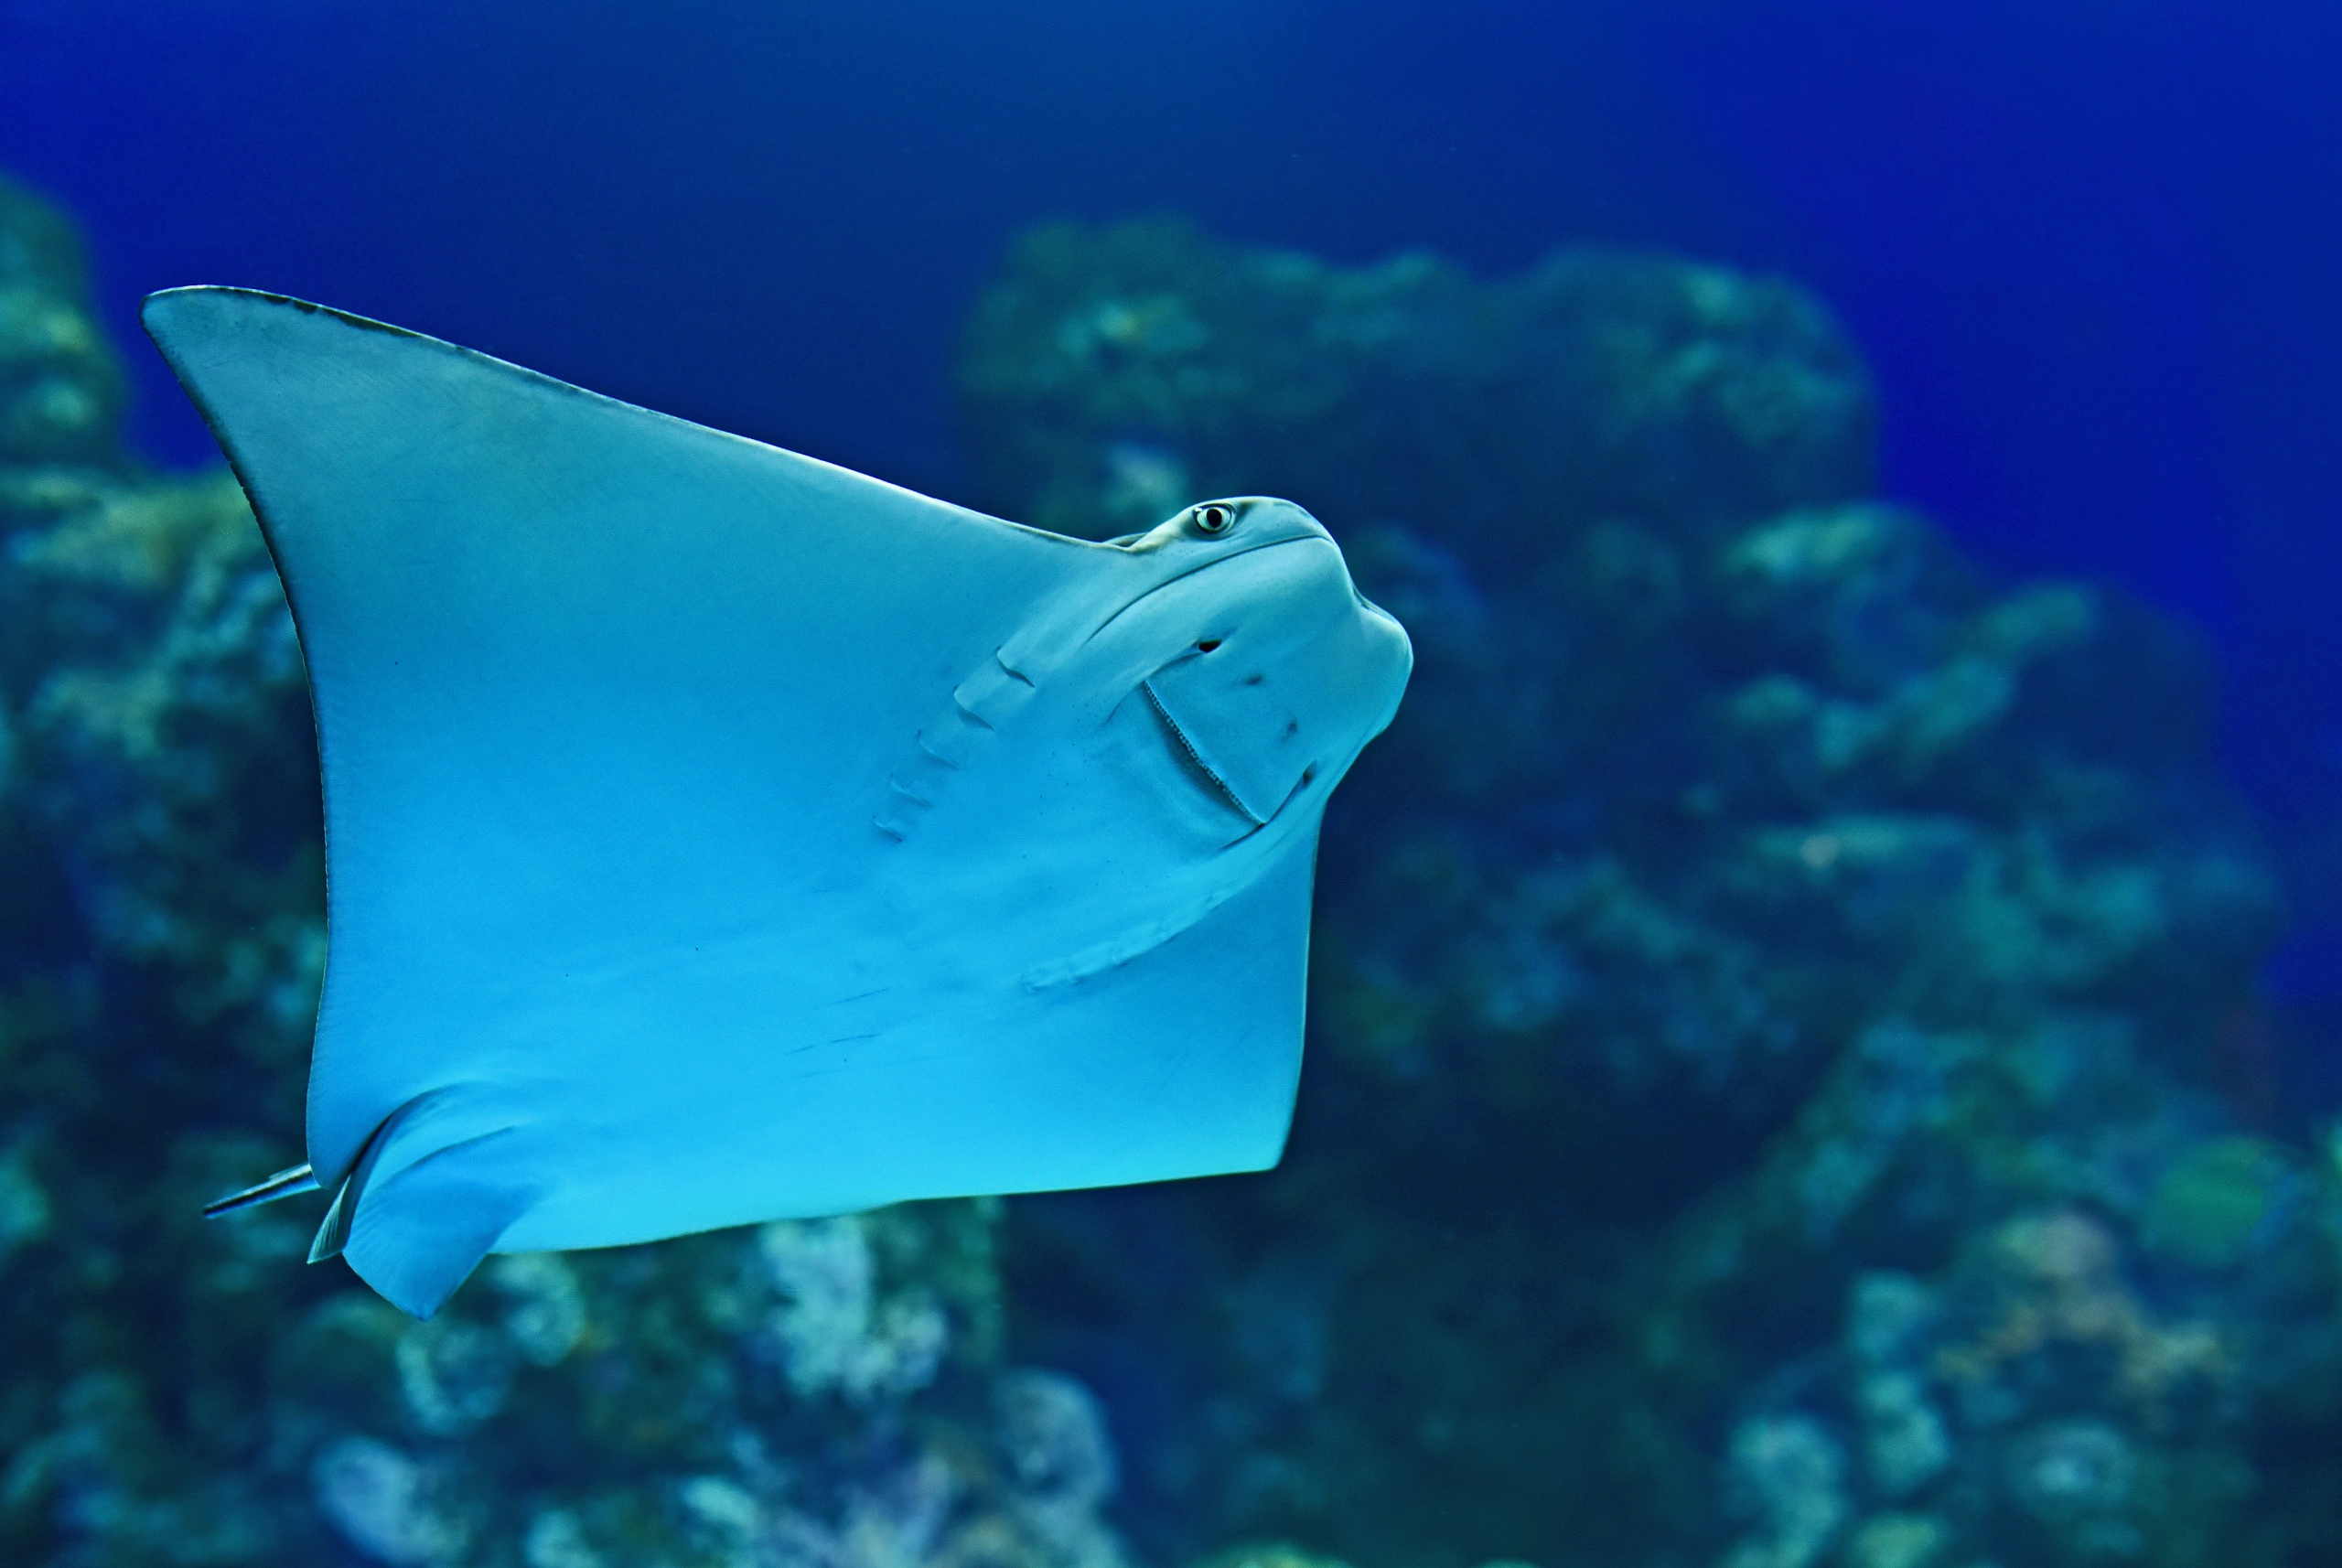 Image of a ray underwater, photographed from below with the nose visible.